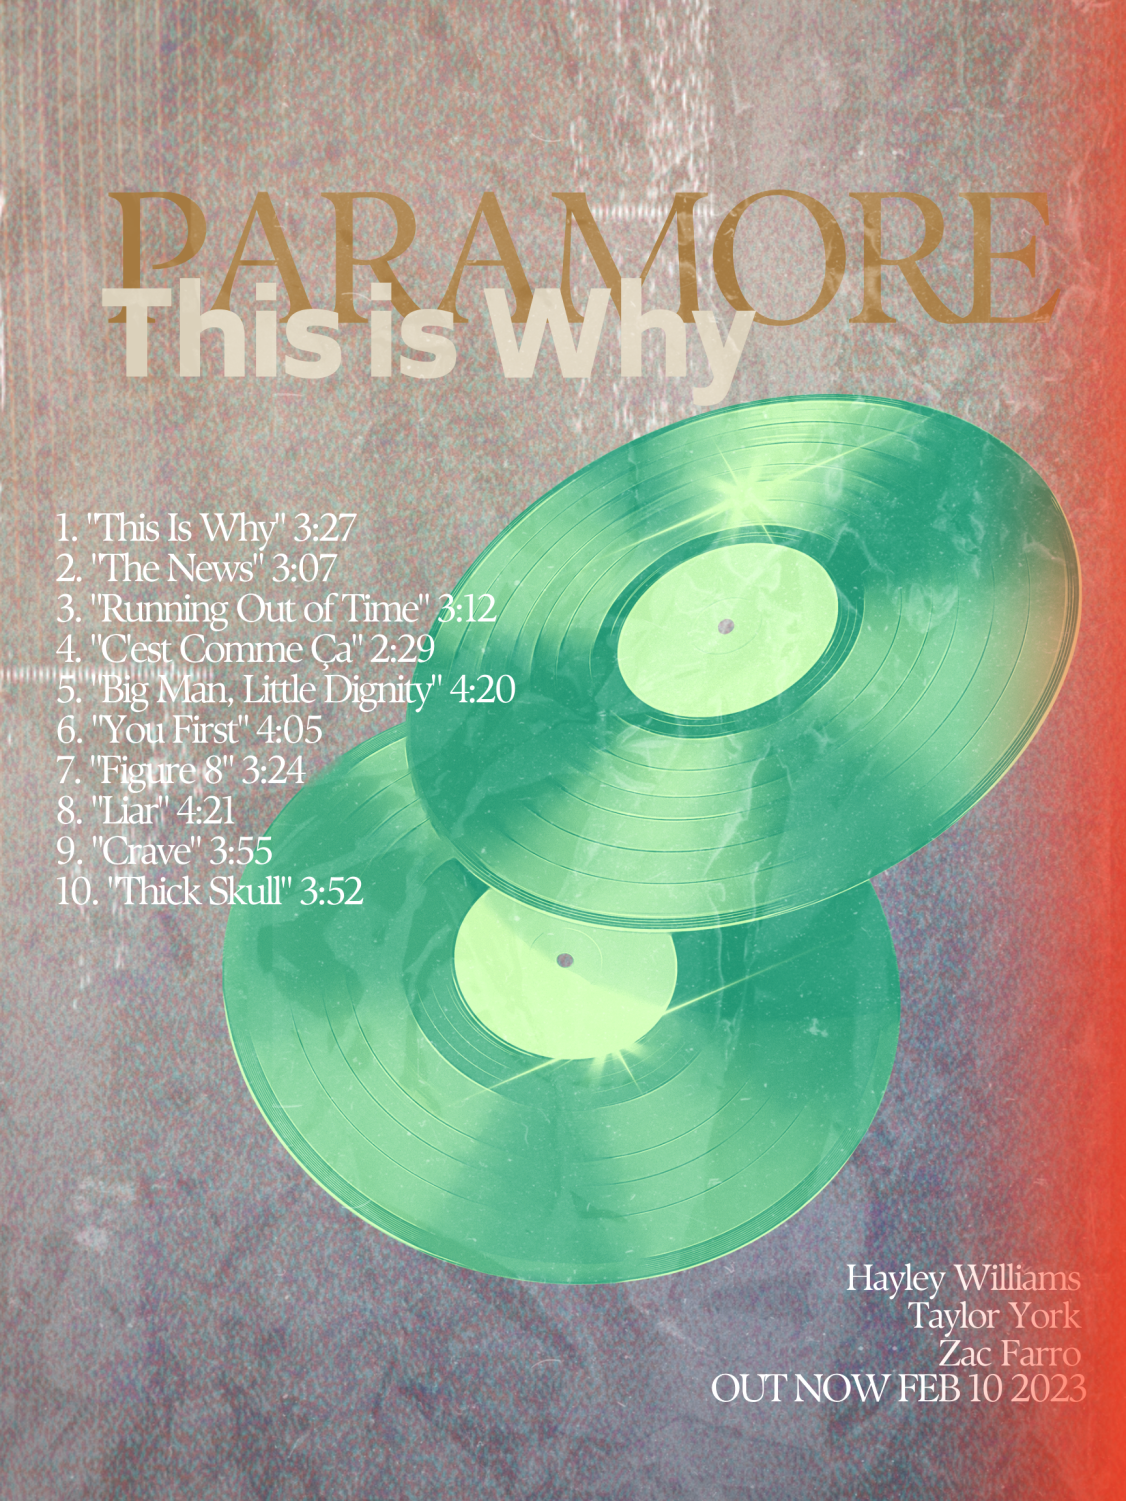 https://hamlineoracle.com/wp-content/uploads/2023/02/paramore-this-is-why-album-cover-oracle-mts-1.png